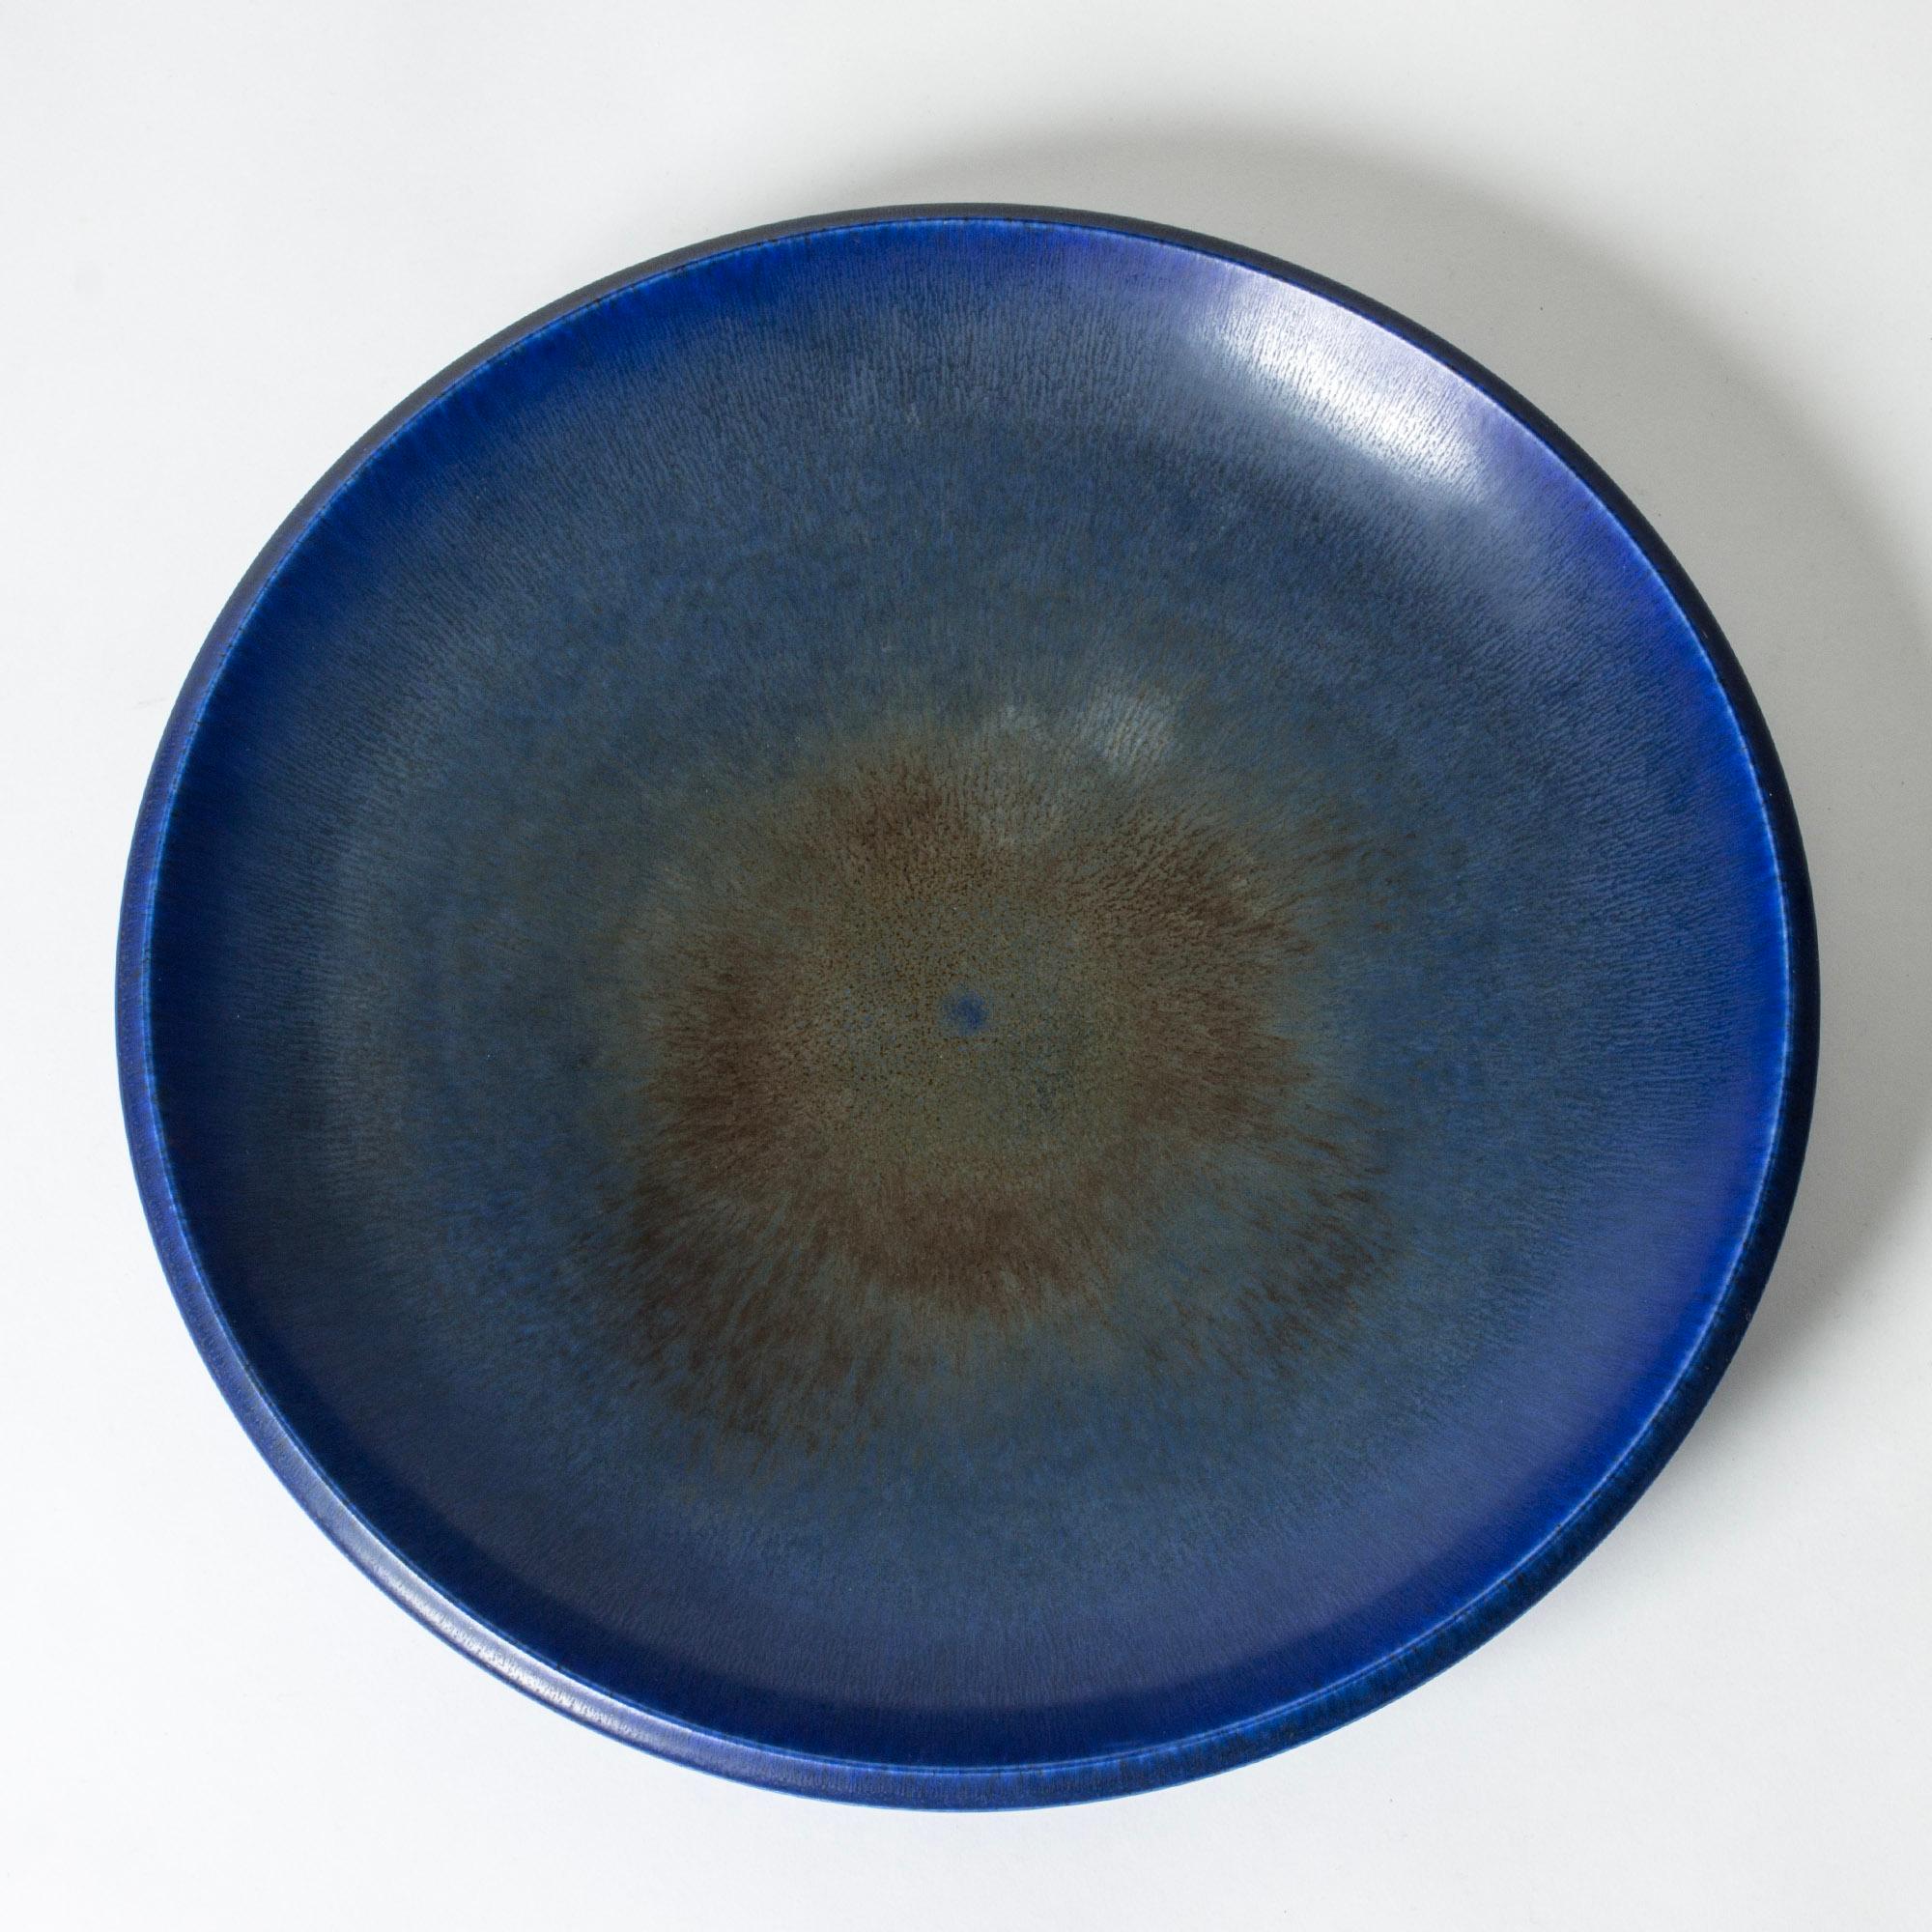 Striking, oversized stoneware platter by Berndt Friberg. Weighty. Beautiful blue hare’s fur glaze, rusty brown in the center.

Berndt Friberg was a Swedish ceramicist, renowned for his stoneware vases and vessels for Gustavsberg. His pure,